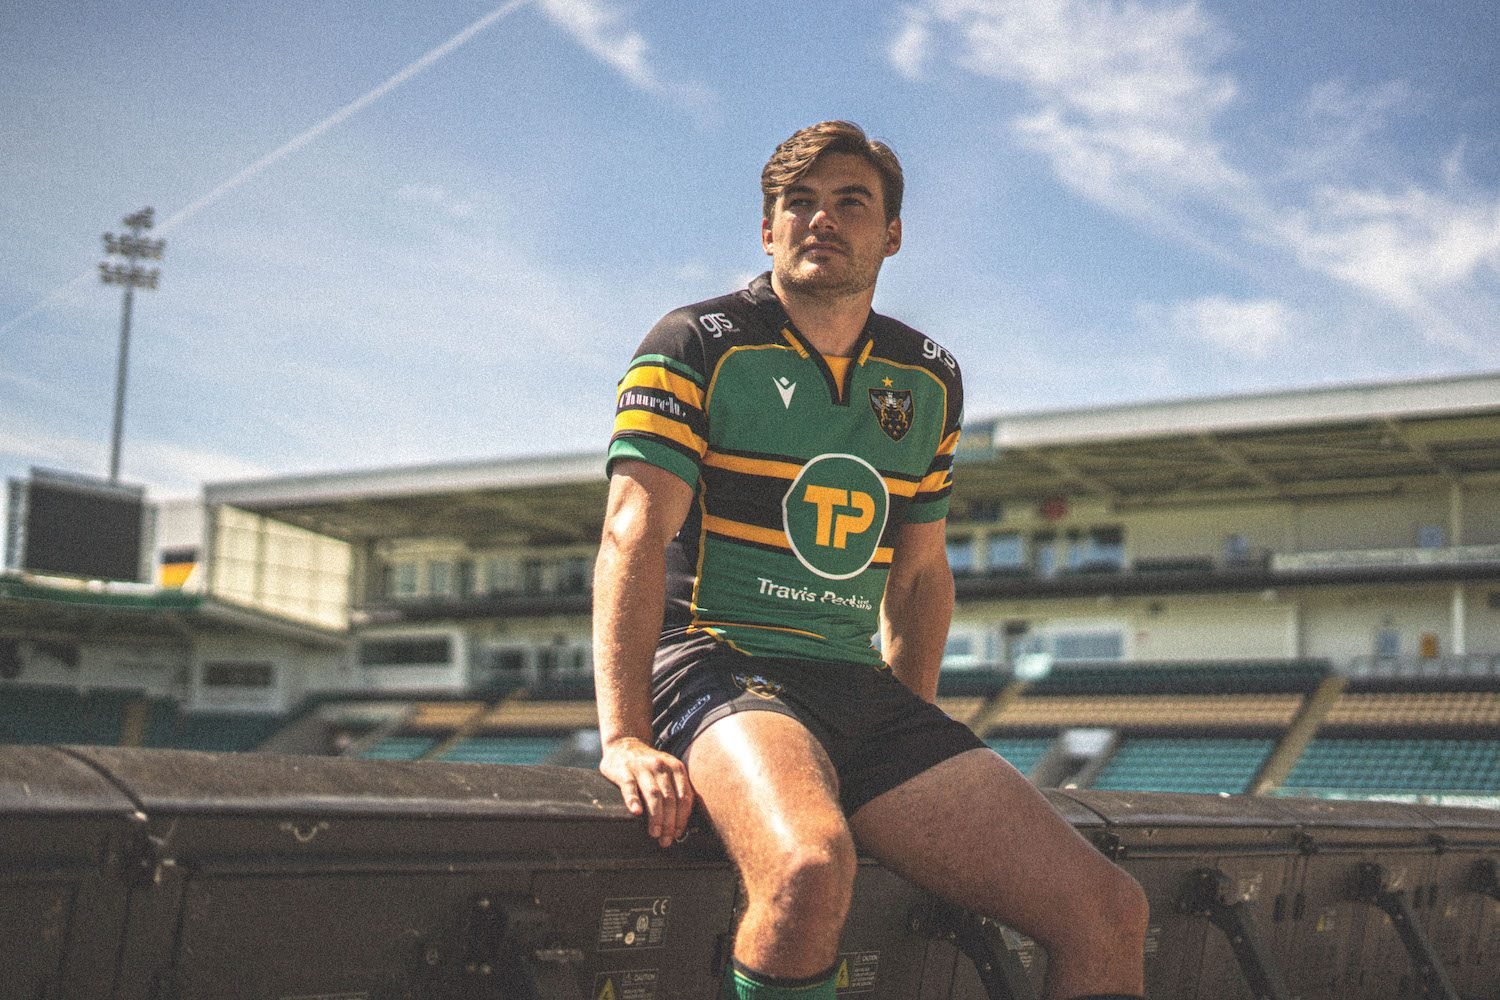 Saints’ new home strip pays homage to the winner of the ‘King of the Kits’ poll